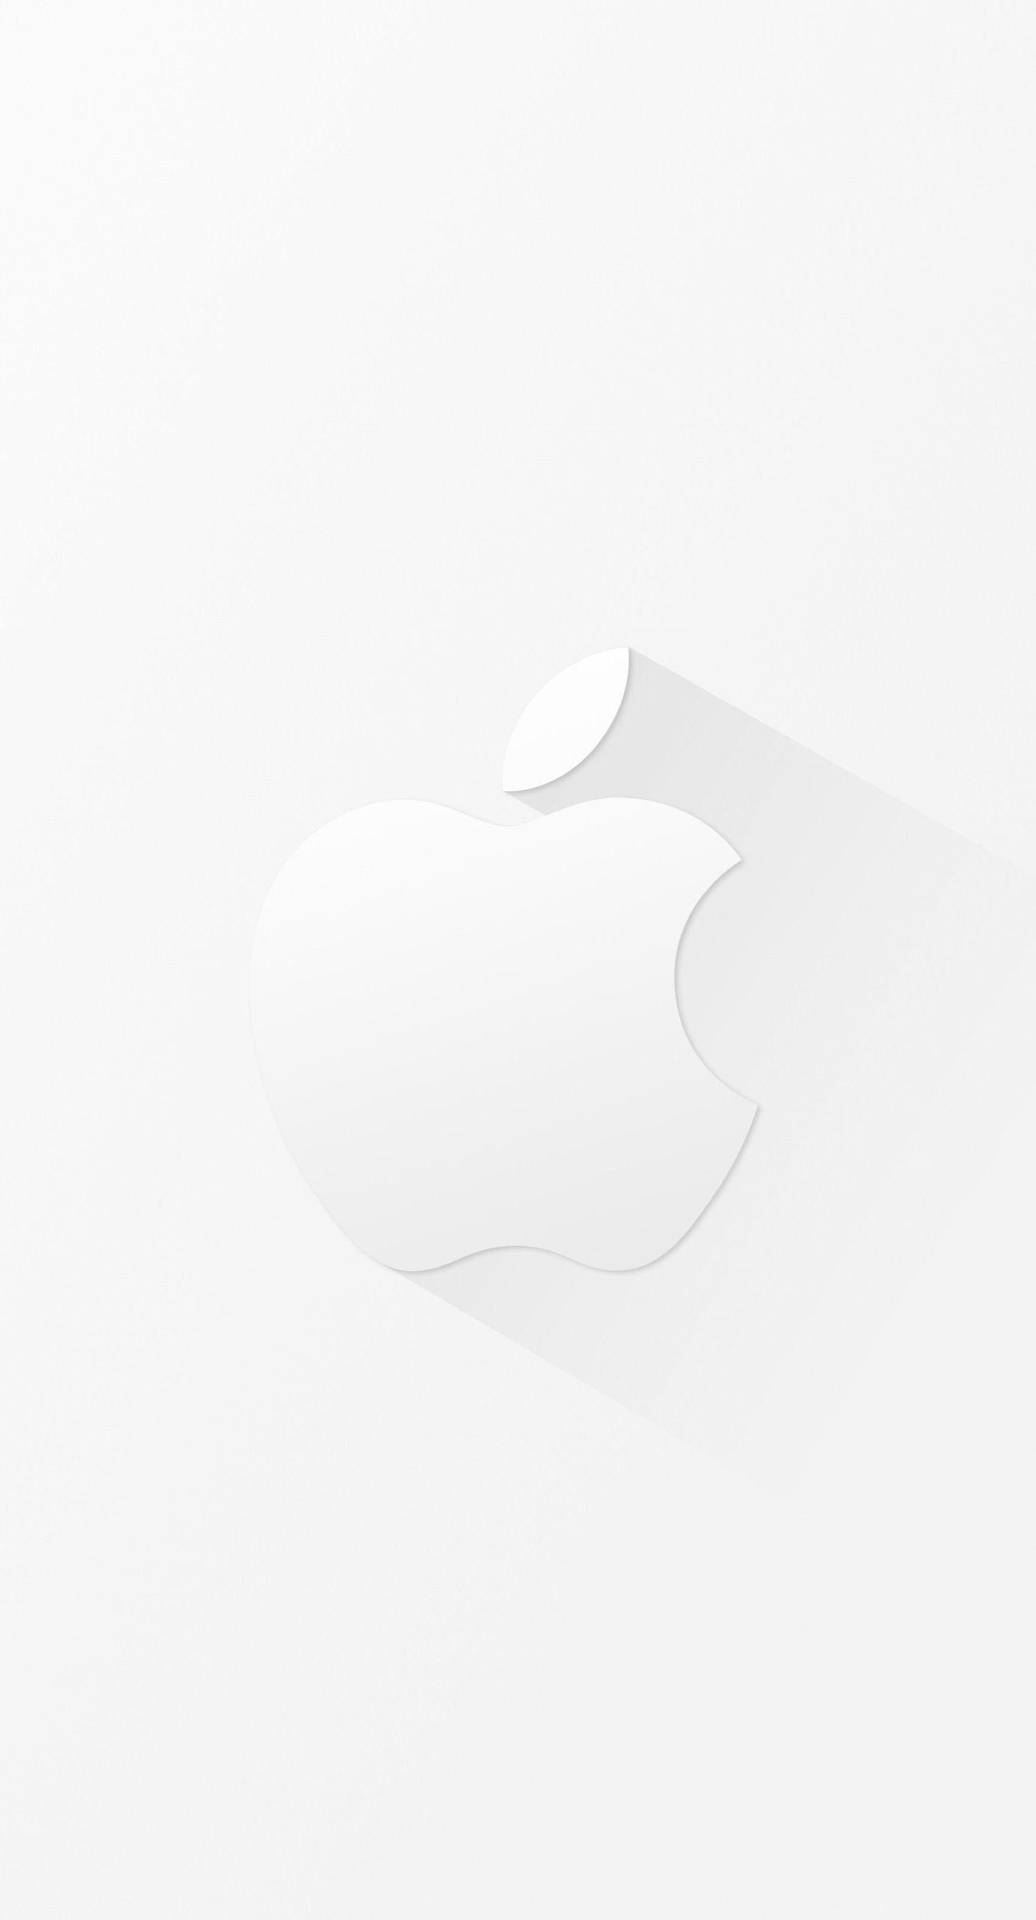 Cool White Apple Picture